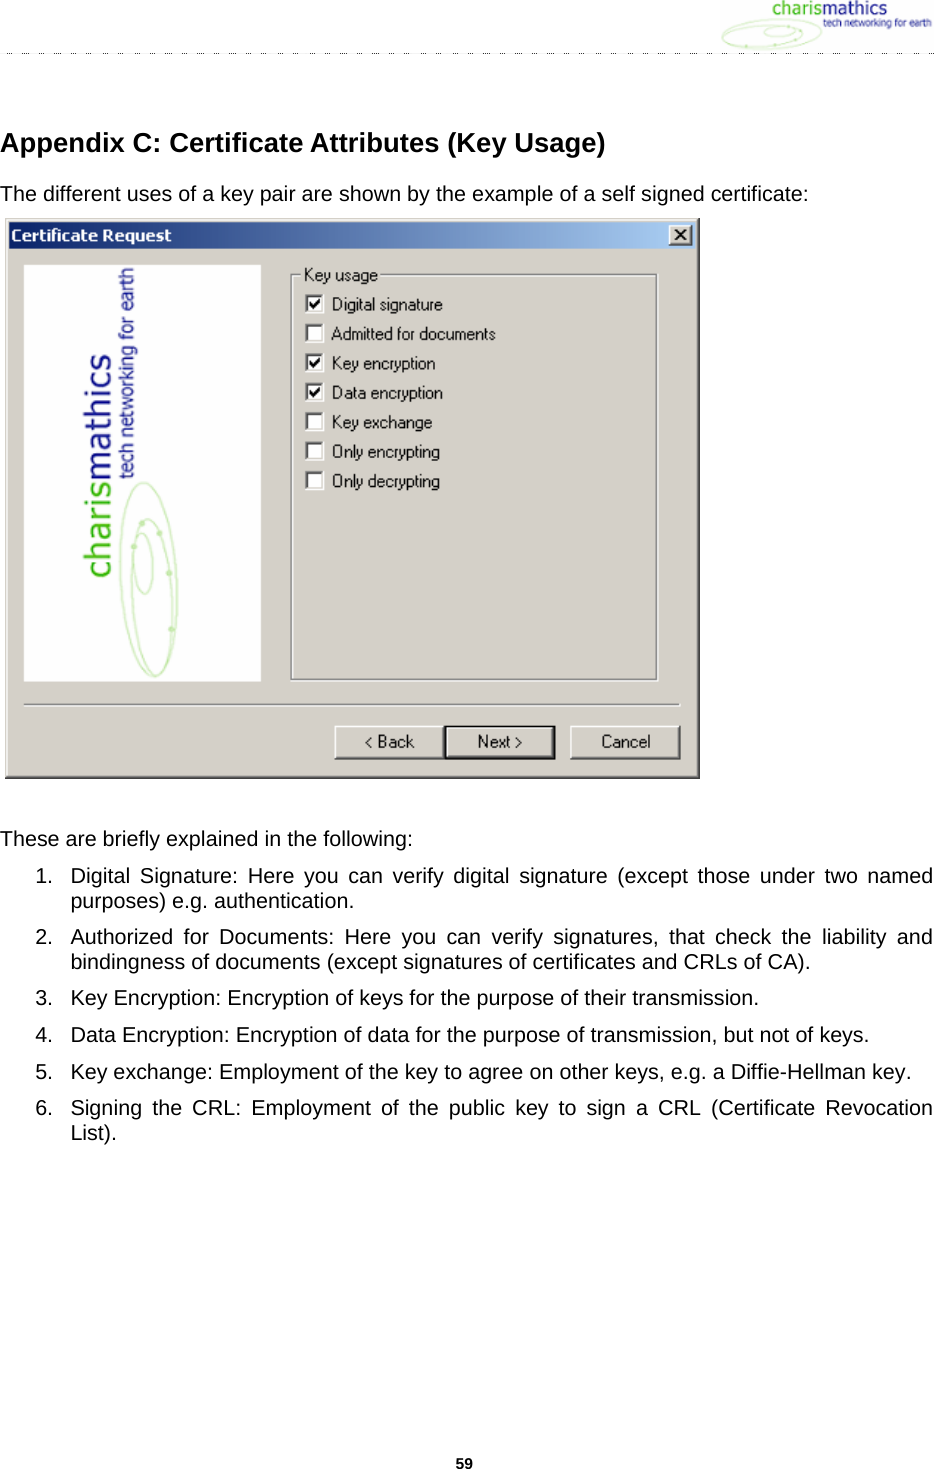     59Appendix C: Certificate Attributes (Key Usage) The different uses of a key pair are shown by the example of a self signed certificate:    These are briefly explained in the following: 1.  Digital Signature: Here you can verify digital signature (except those under two named purposes) e.g. authentication.  2.  Authorized for Documents: Here you can verify signatures, that check the liability and bindingness of documents (except signatures of certificates and CRLs of CA). 3.  Key Encryption: Encryption of keys for the purpose of their transmission. 4.  Data Encryption: Encryption of data for the purpose of transmission, but not of keys. 5.  Key exchange: Employment of the key to agree on other keys, e.g. a Diffie-Hellman key. 6.  Signing the CRL: Employment of the public key to sign a CRL (Certificate Revocation List).  